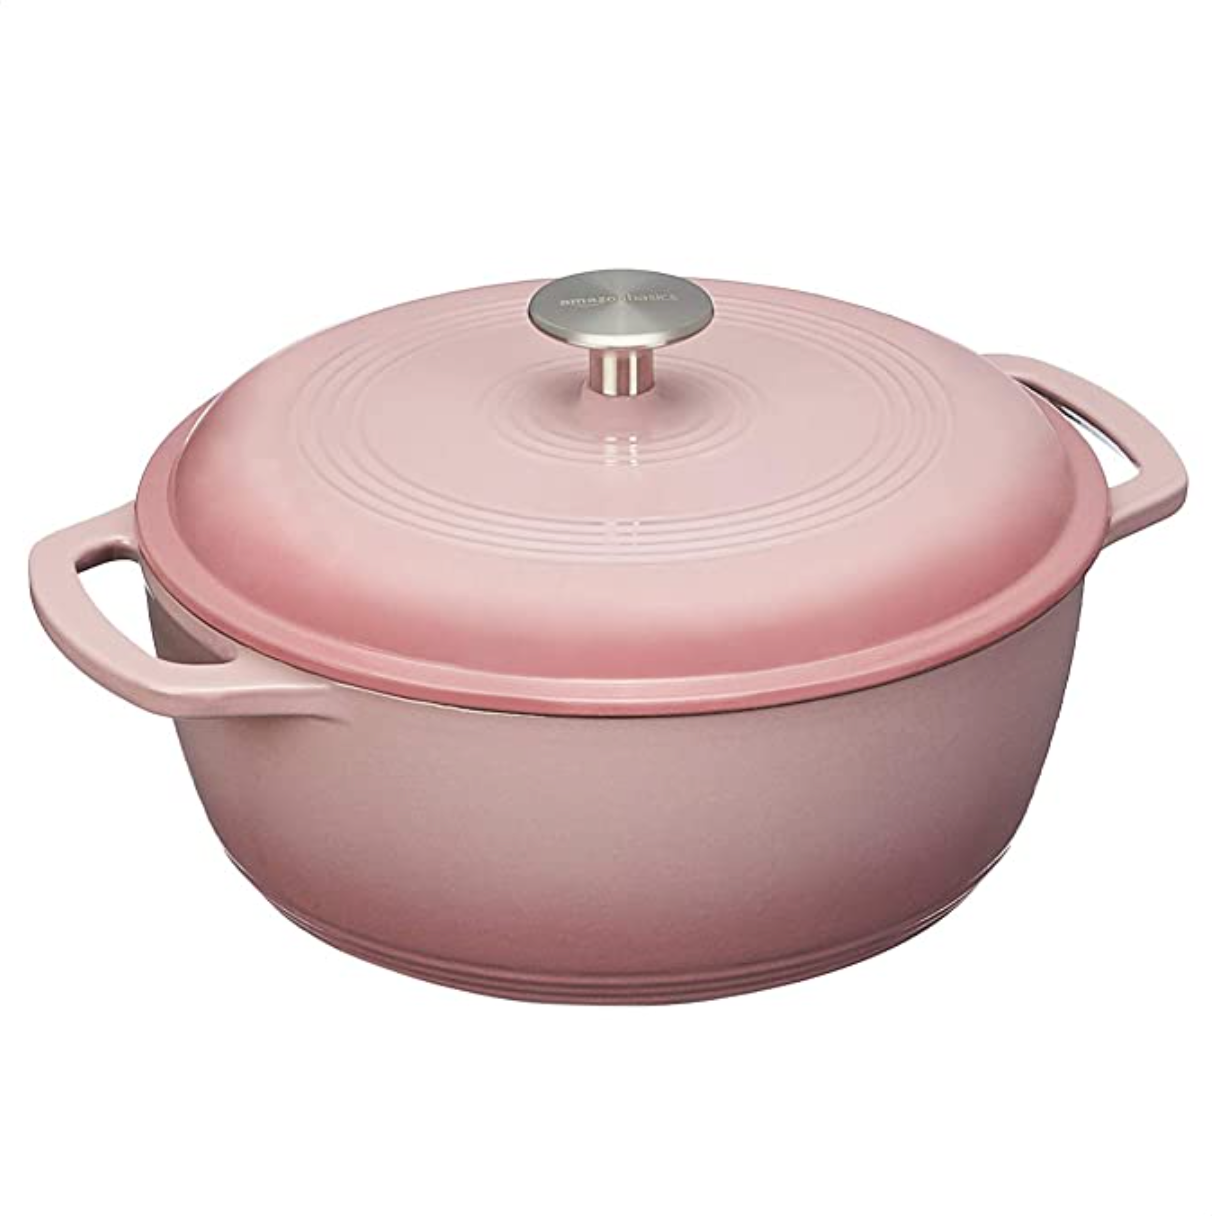 Enameled Cast Iron Covered Dutch Oven